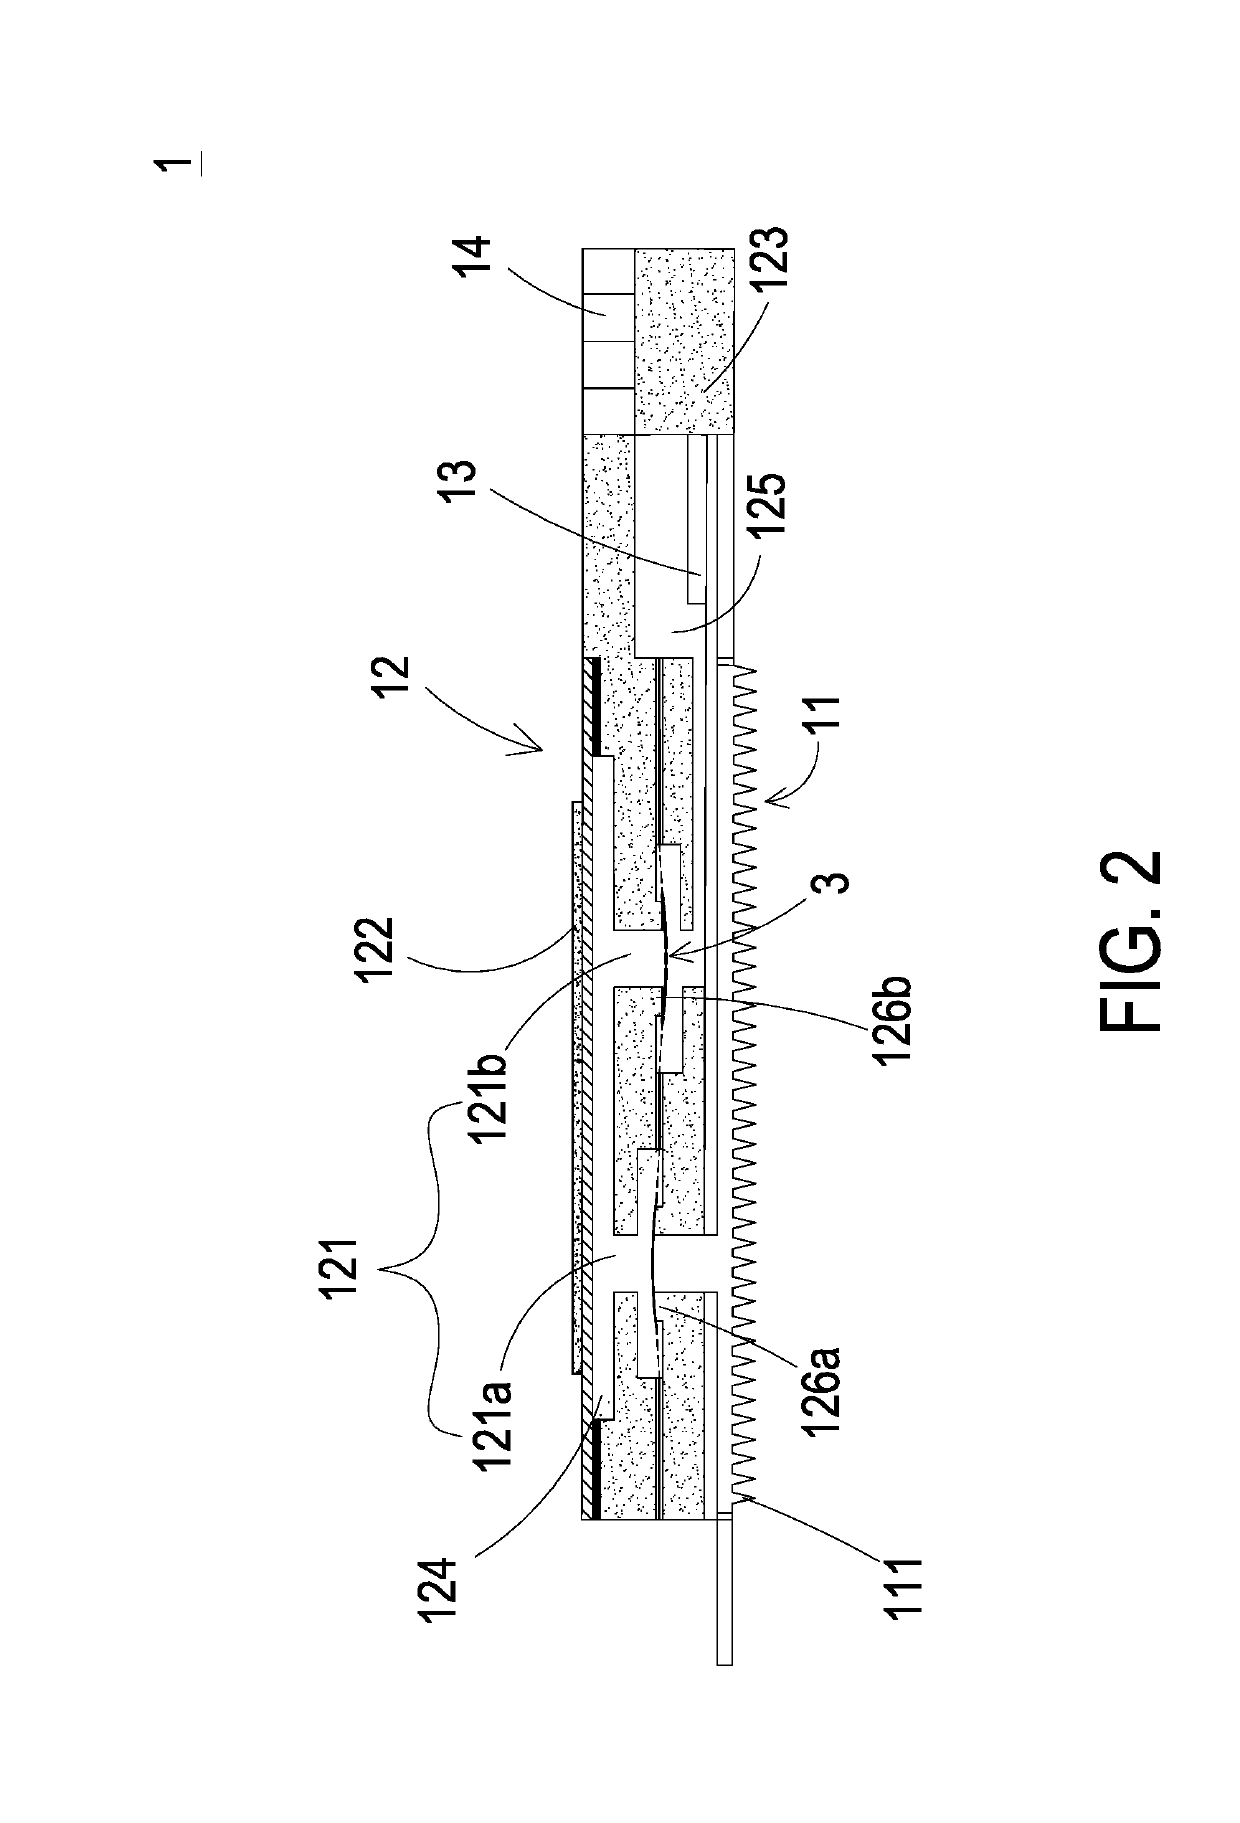 Blood glucose monitoring and controlling system